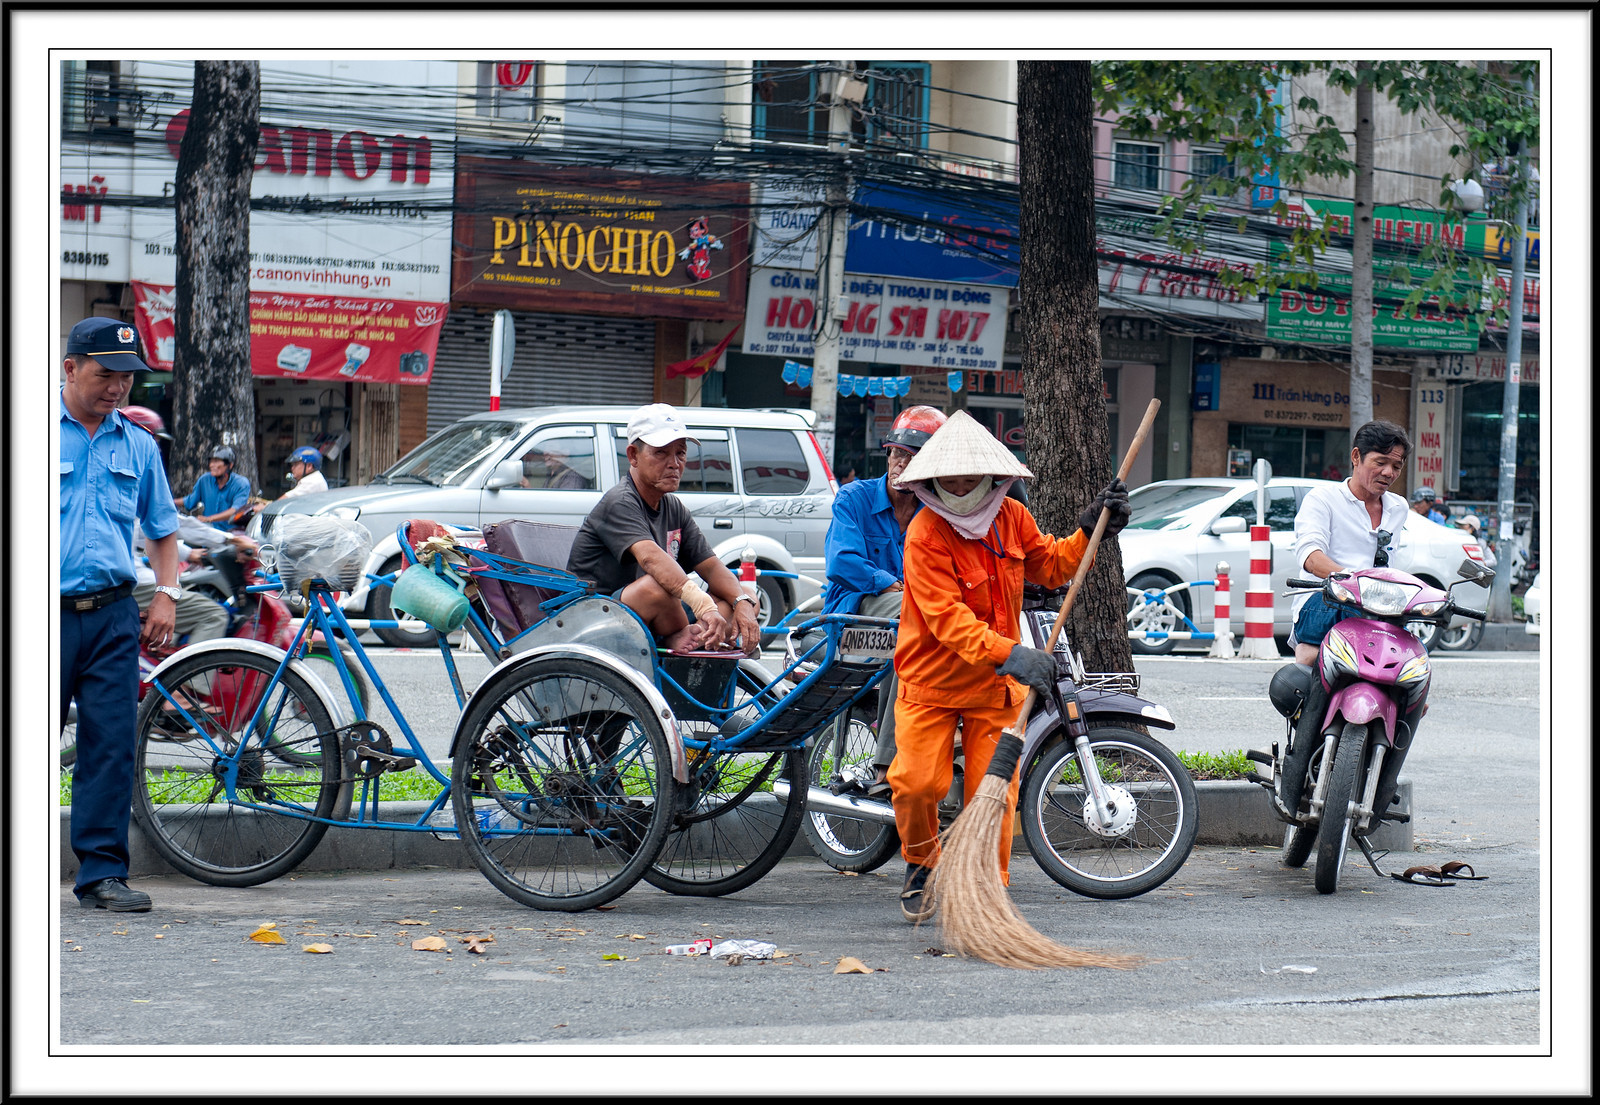      

 
  A woman cleaning the streets in Saigon while the men are busy watching.
 






















     